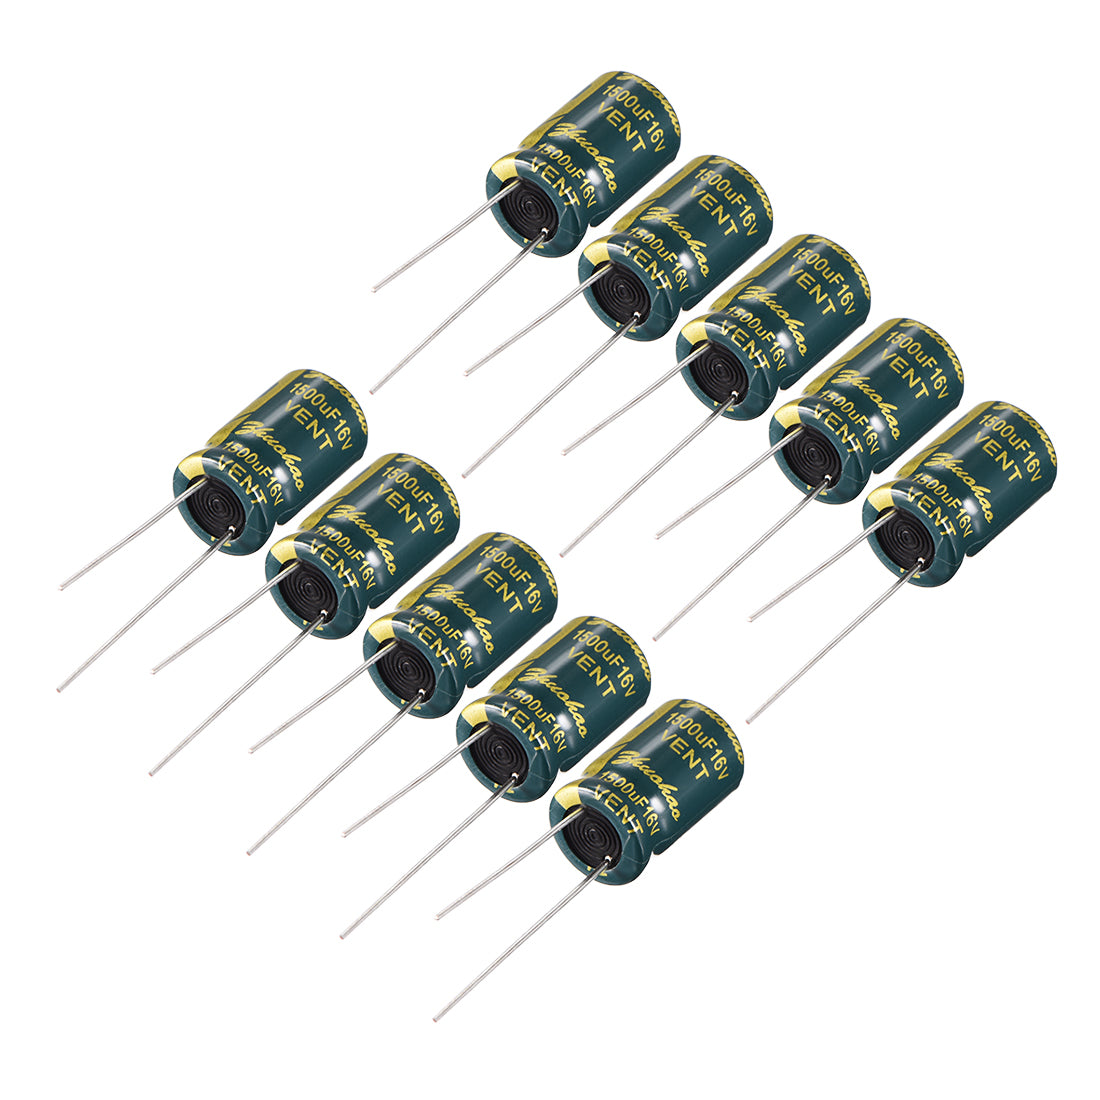 uxcell Uxcell Aluminum Radial Electrolytic Capacitor Low ESR Green w 1500UF 16V 105 Celsius Life 3000H 10 x 17 mm High Ripple Current,Low Impedance 10pcs